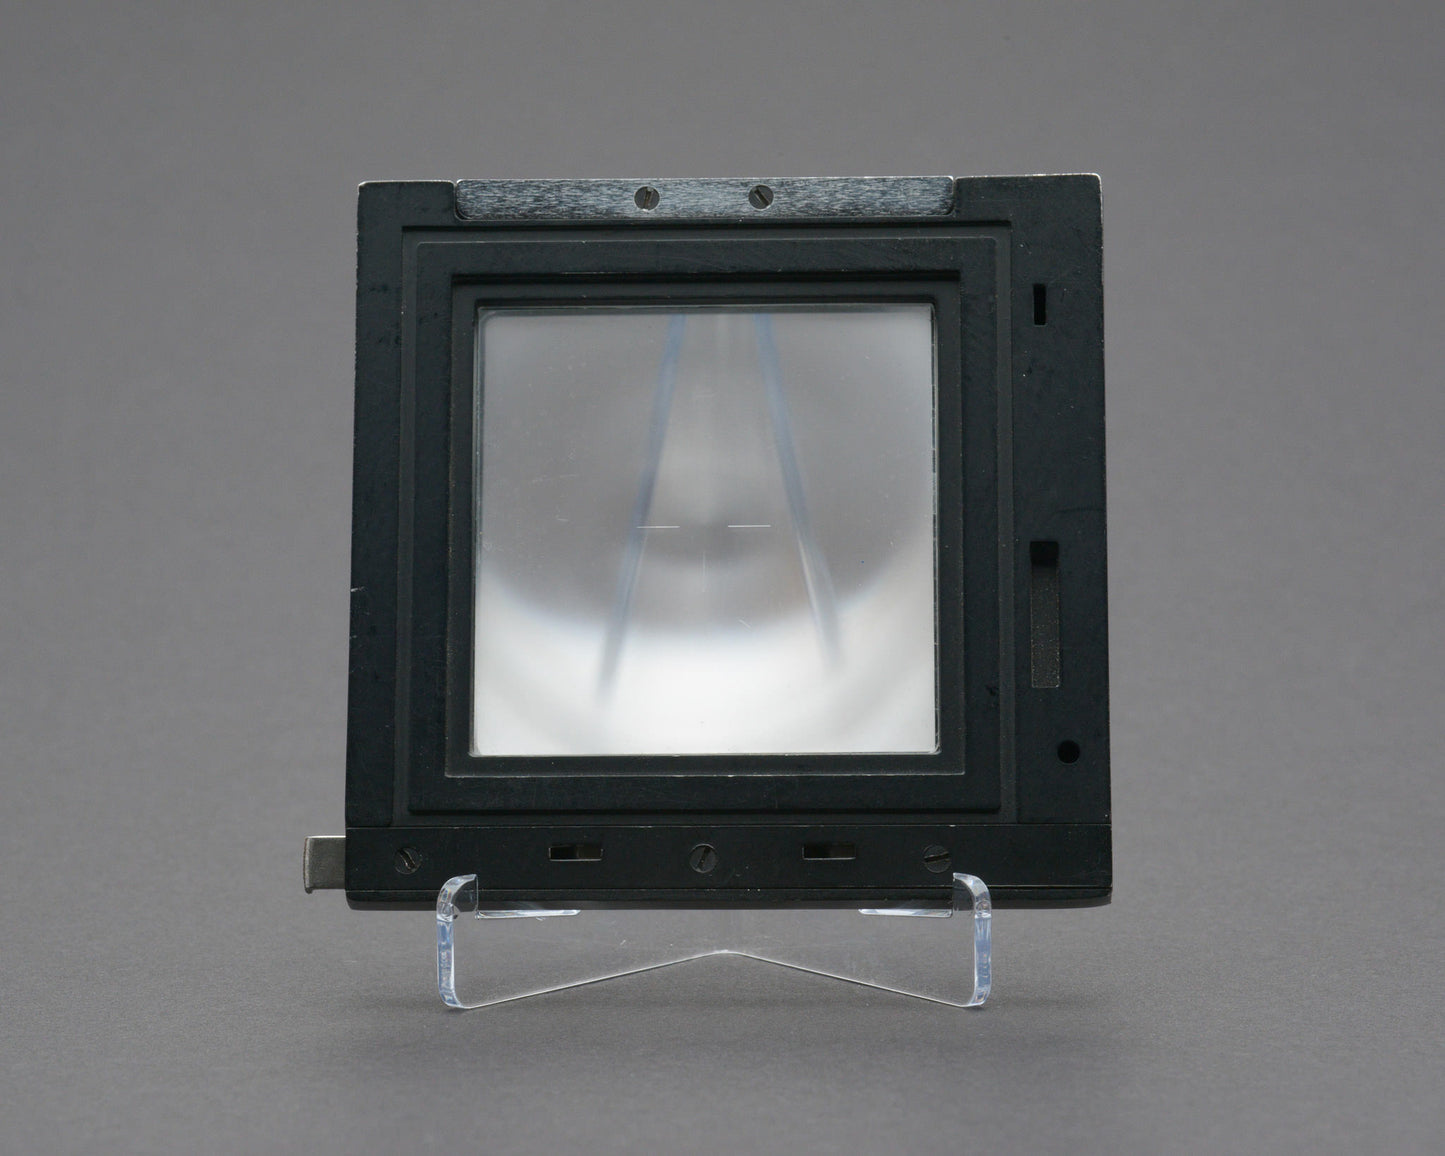 Hasselblad SWC Focusing Screen Adapter 41025 for SWC/M 903SWC